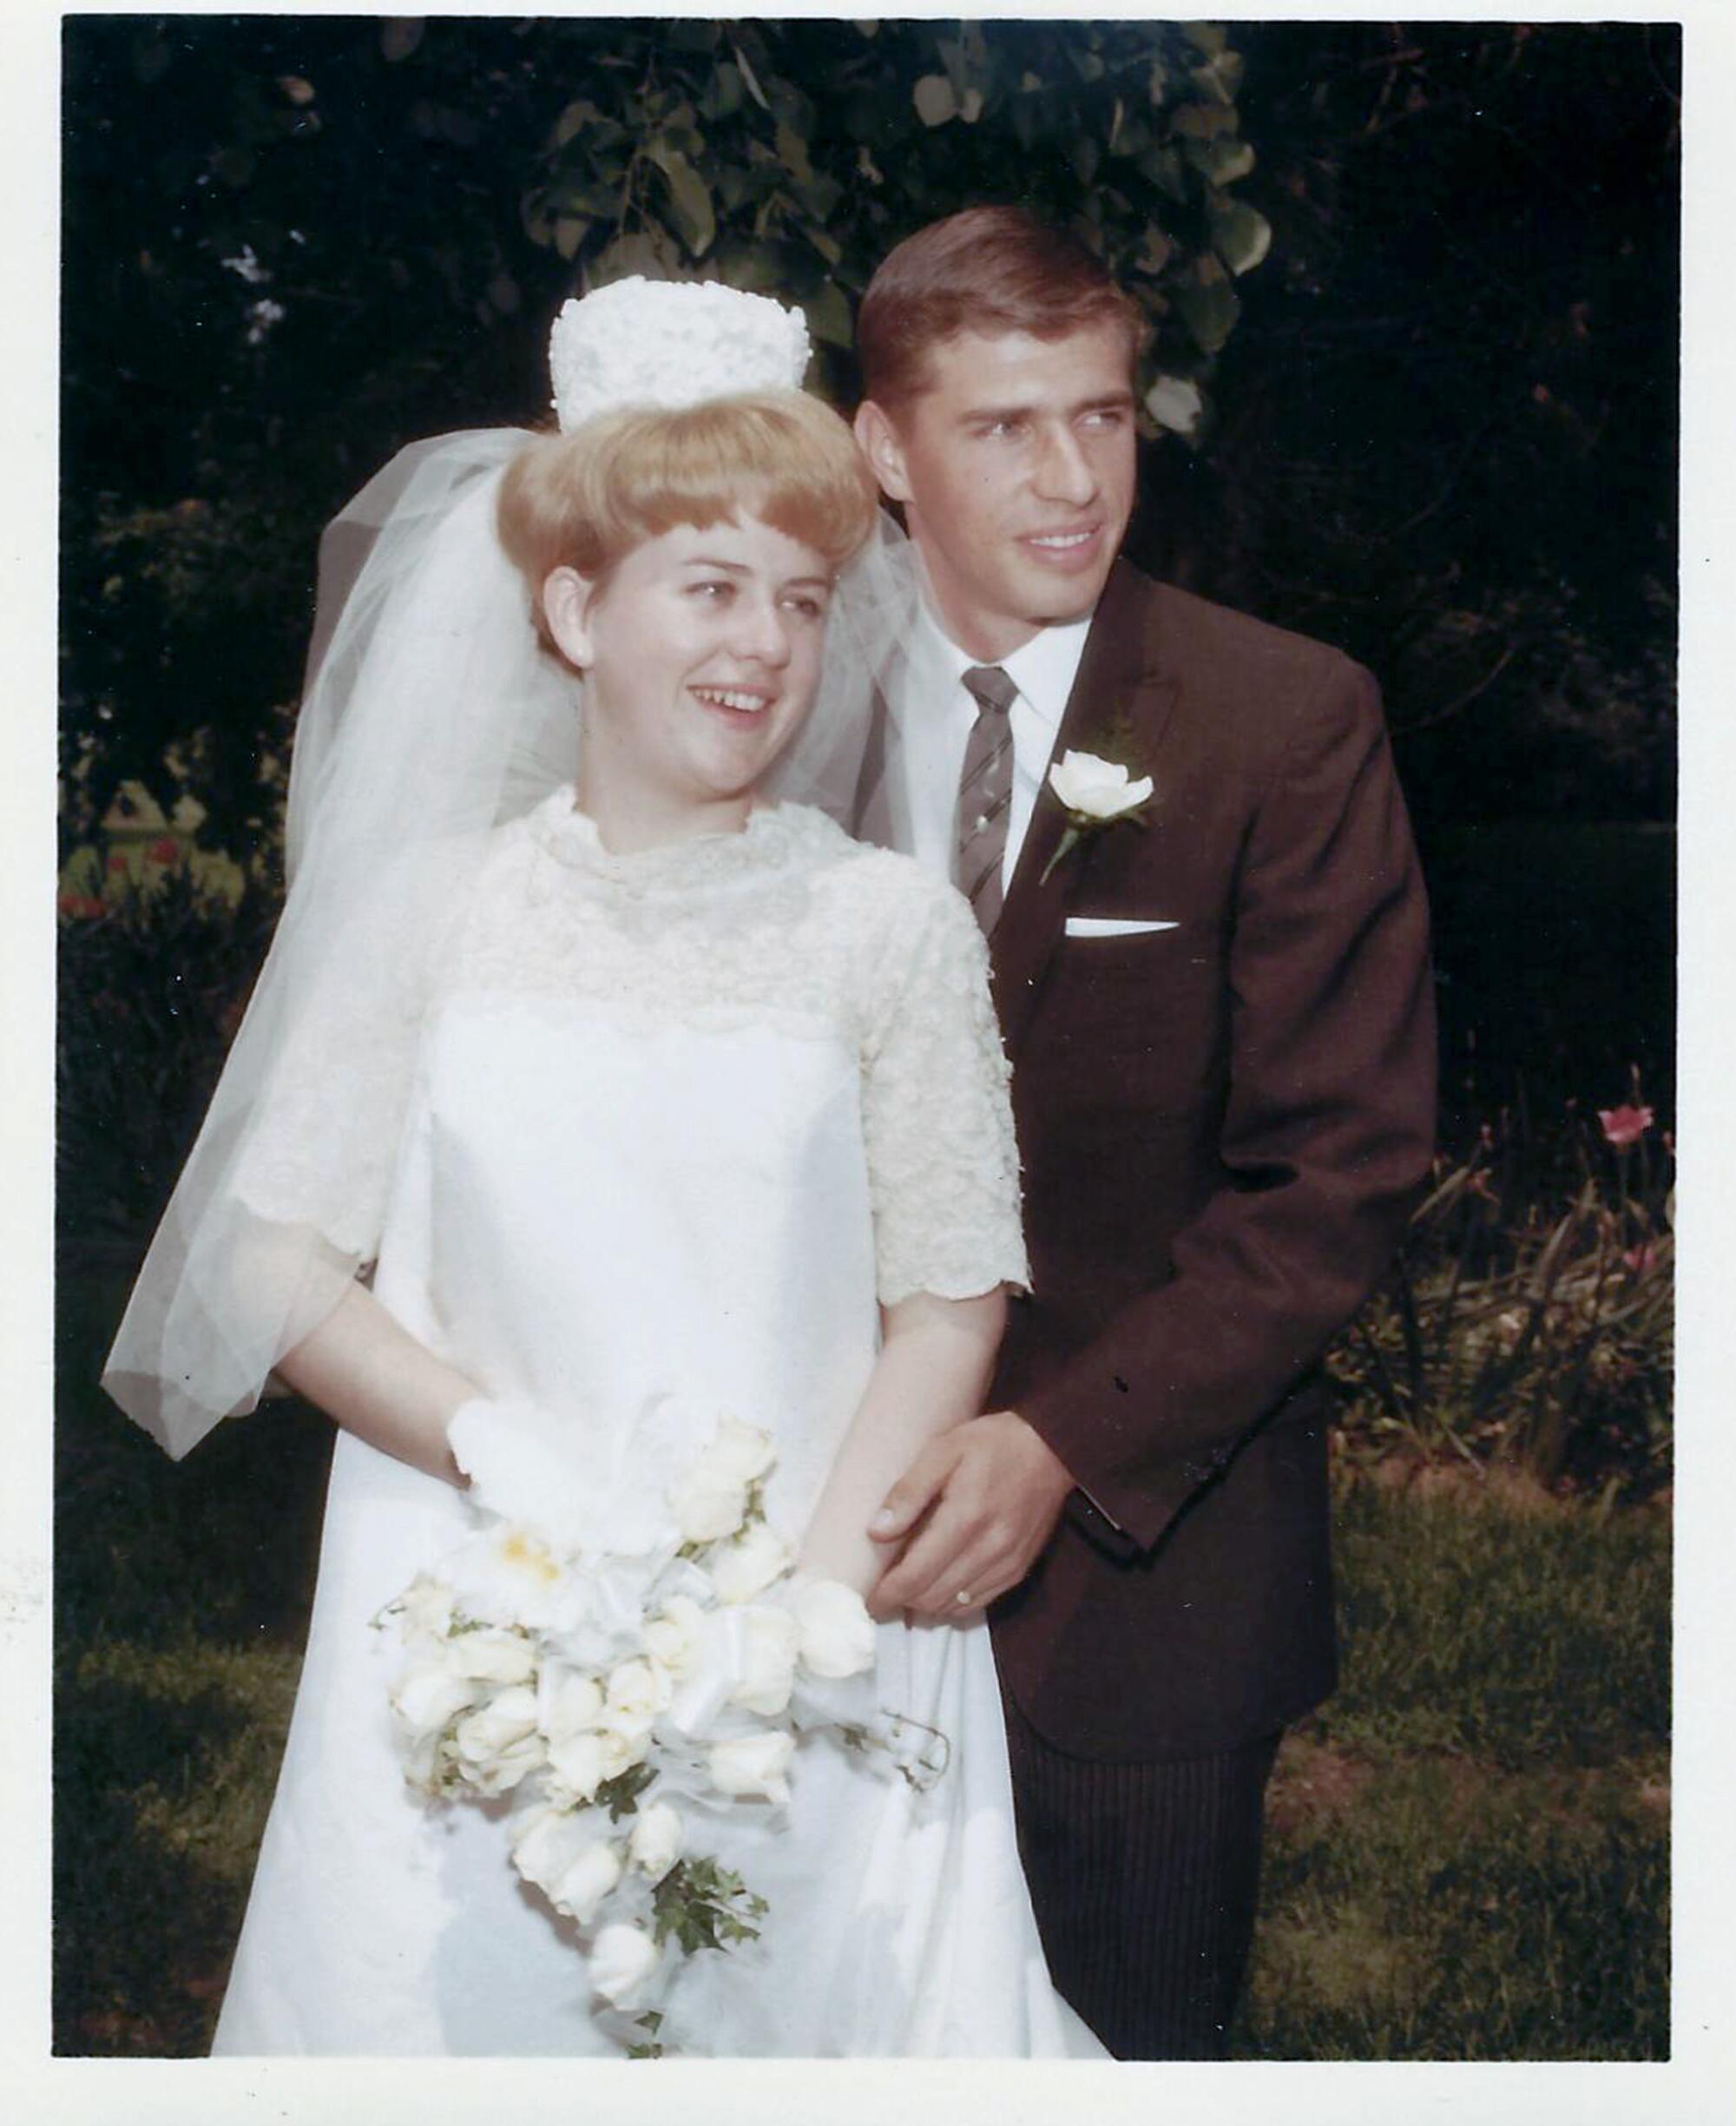 Janet and Gus Herrmann at their wedding in 1968.